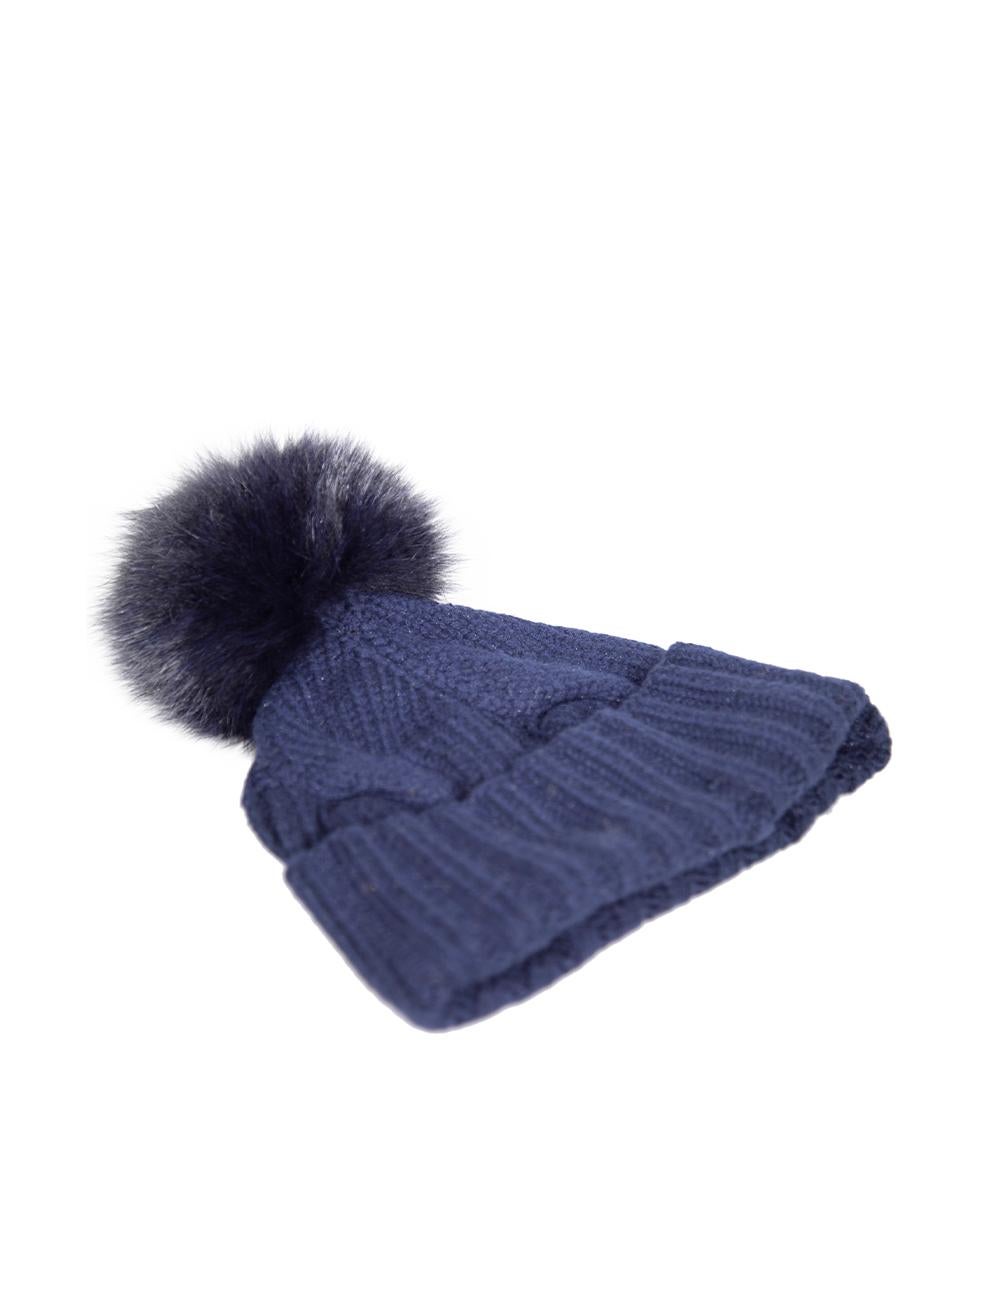 CONDITION is Very good. Minimal wear to hat is evident. Minimal wear with a pull to the knit at the edge on this used Loro Piana designer resale item.
 
 Details
 Blue
 Cashmere
 Cable knit hat
 Pompom detail
 Stretchy
 
 
 Made in Italy
 
